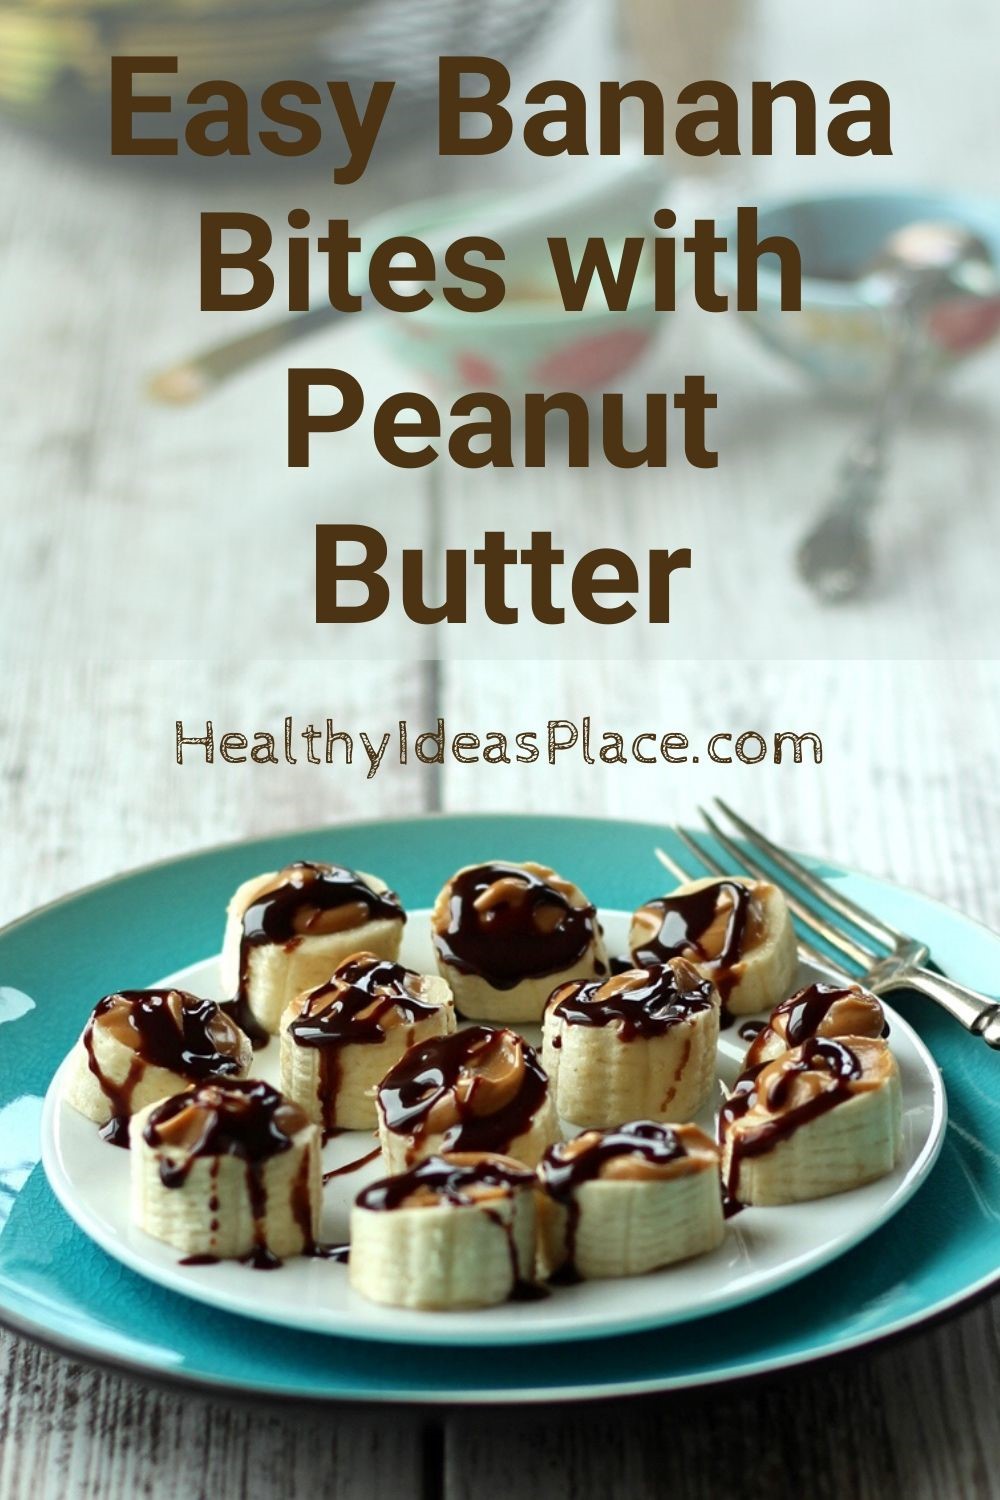 slices of banana topped with peanut butter and chocolate on white plate